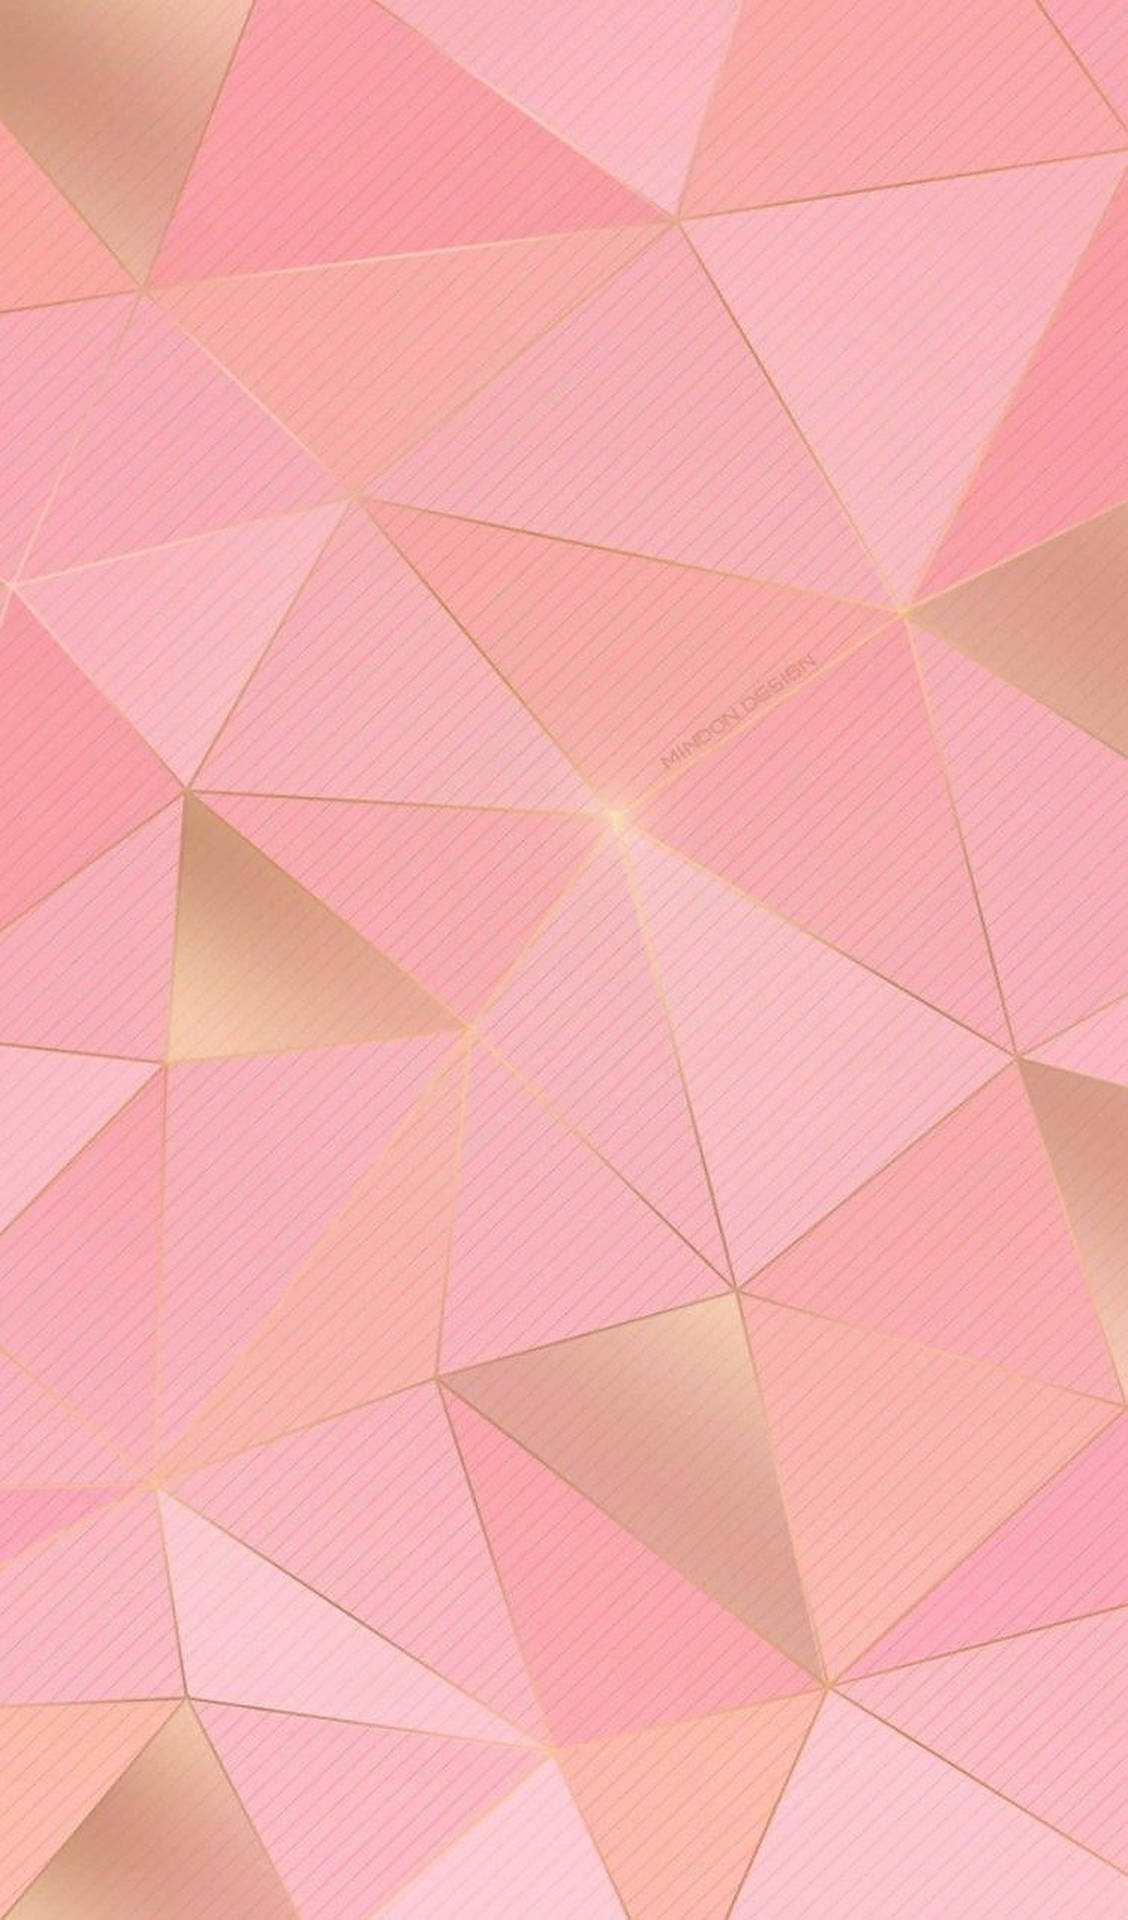 Geometric iPhone Wallpaper in Pastel Pink and Rose Gold with high-resolution 1080x1920 pixel. You can use this wallpaper for your iPhone 5, 6, 7, 8, X, XS, XR backgrounds, Mobile Screensaver, or iPad Lock Screen - Geometry, soft pink, light pink, design